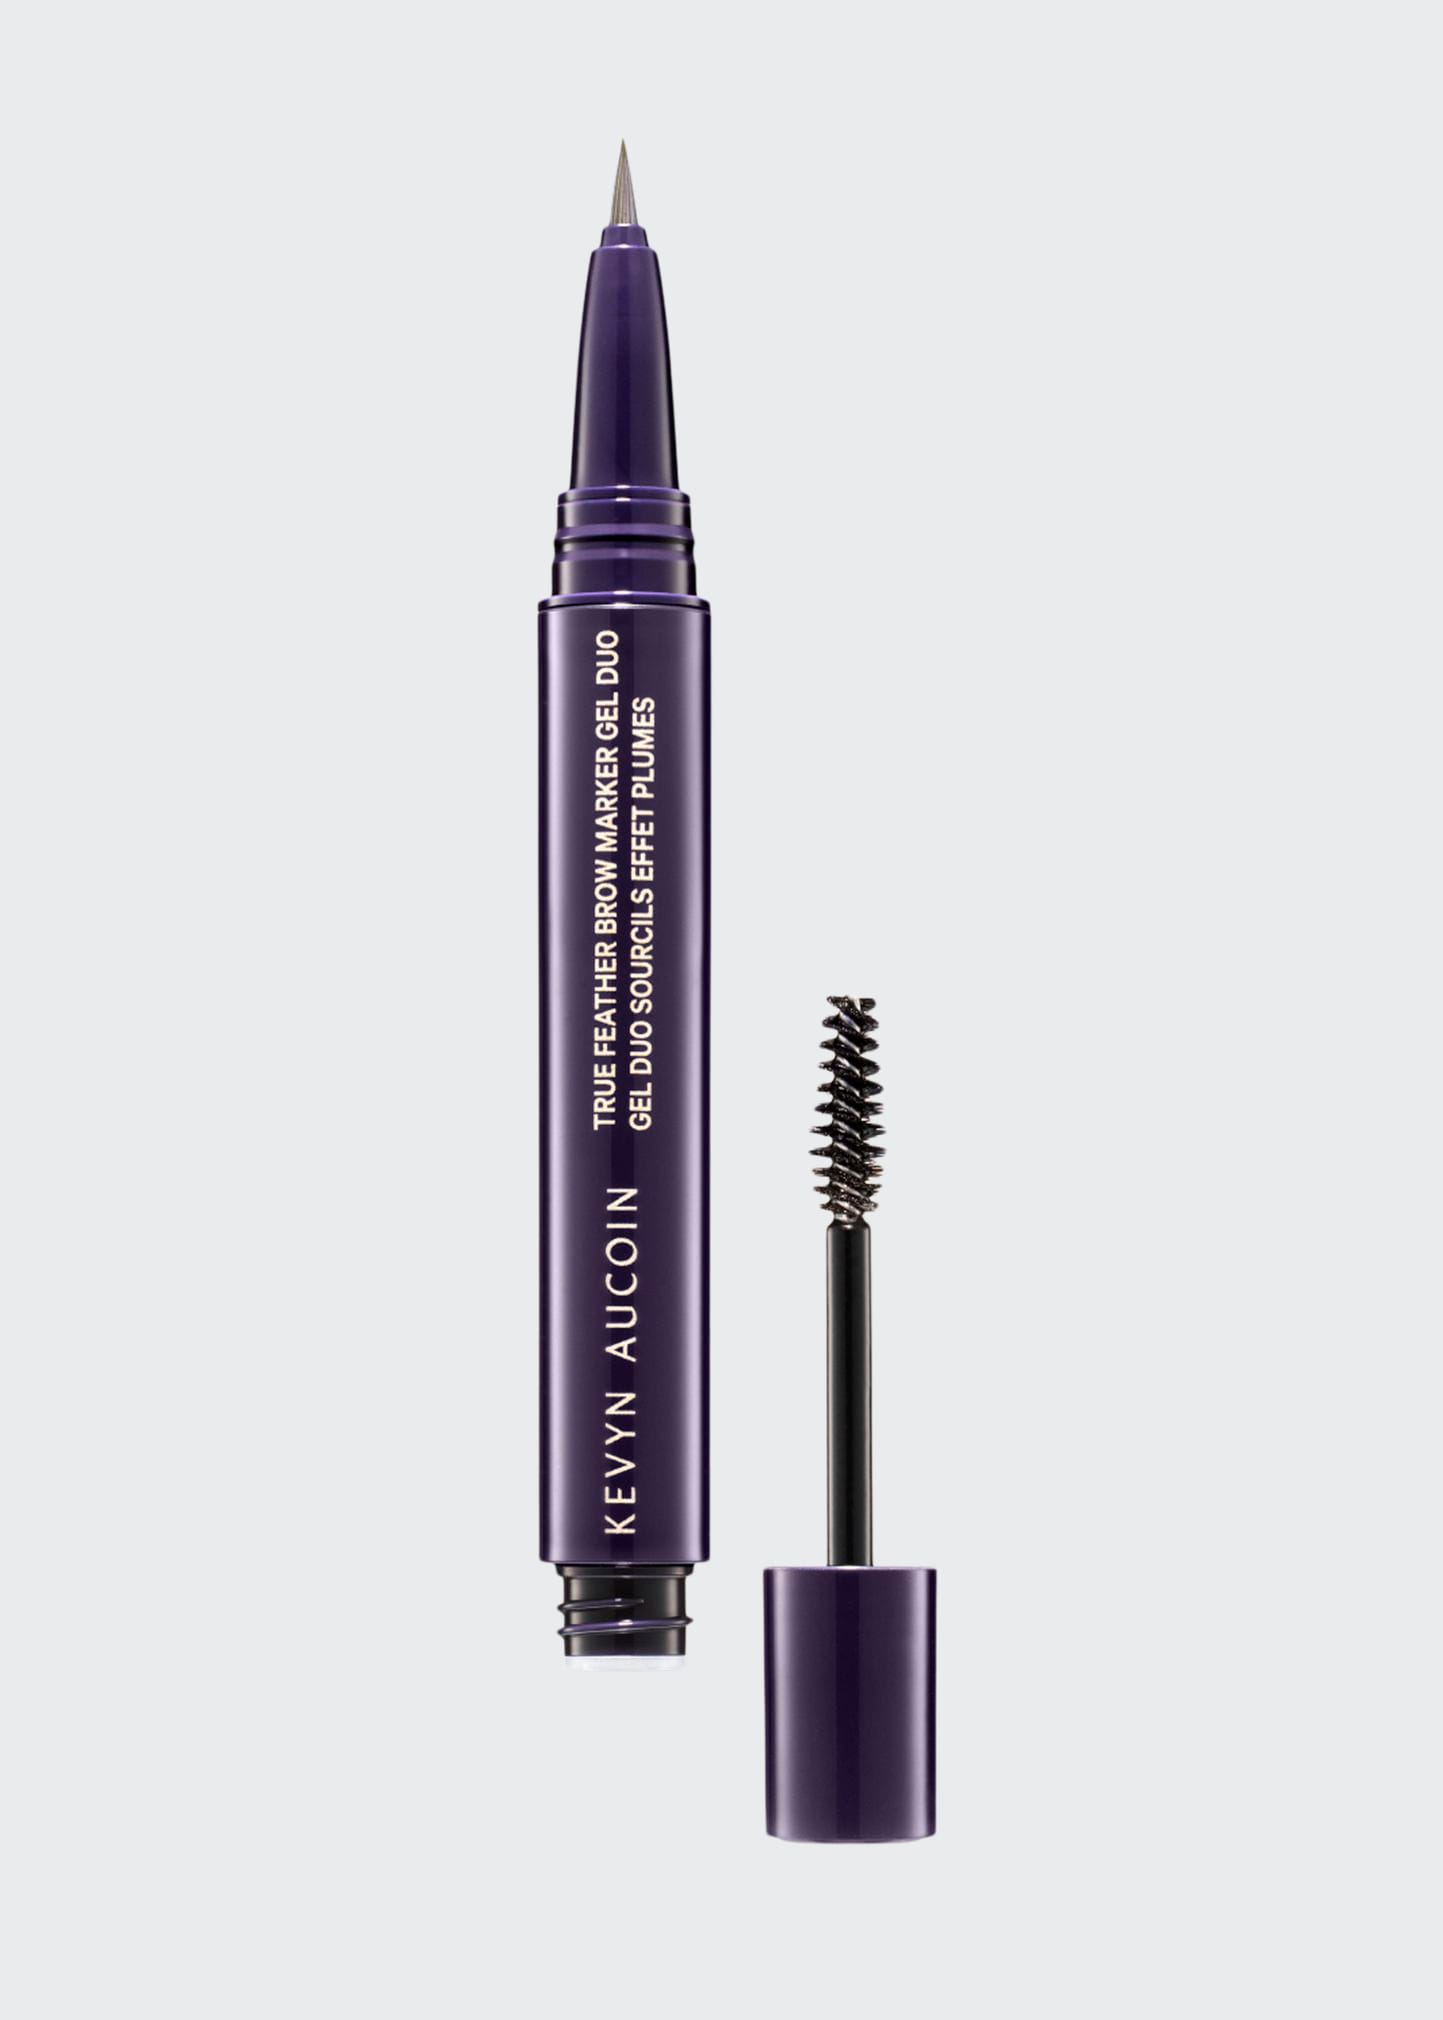 Kevyn Aucoin True Feather Brow Marker Gel Duo In Ash Blonde